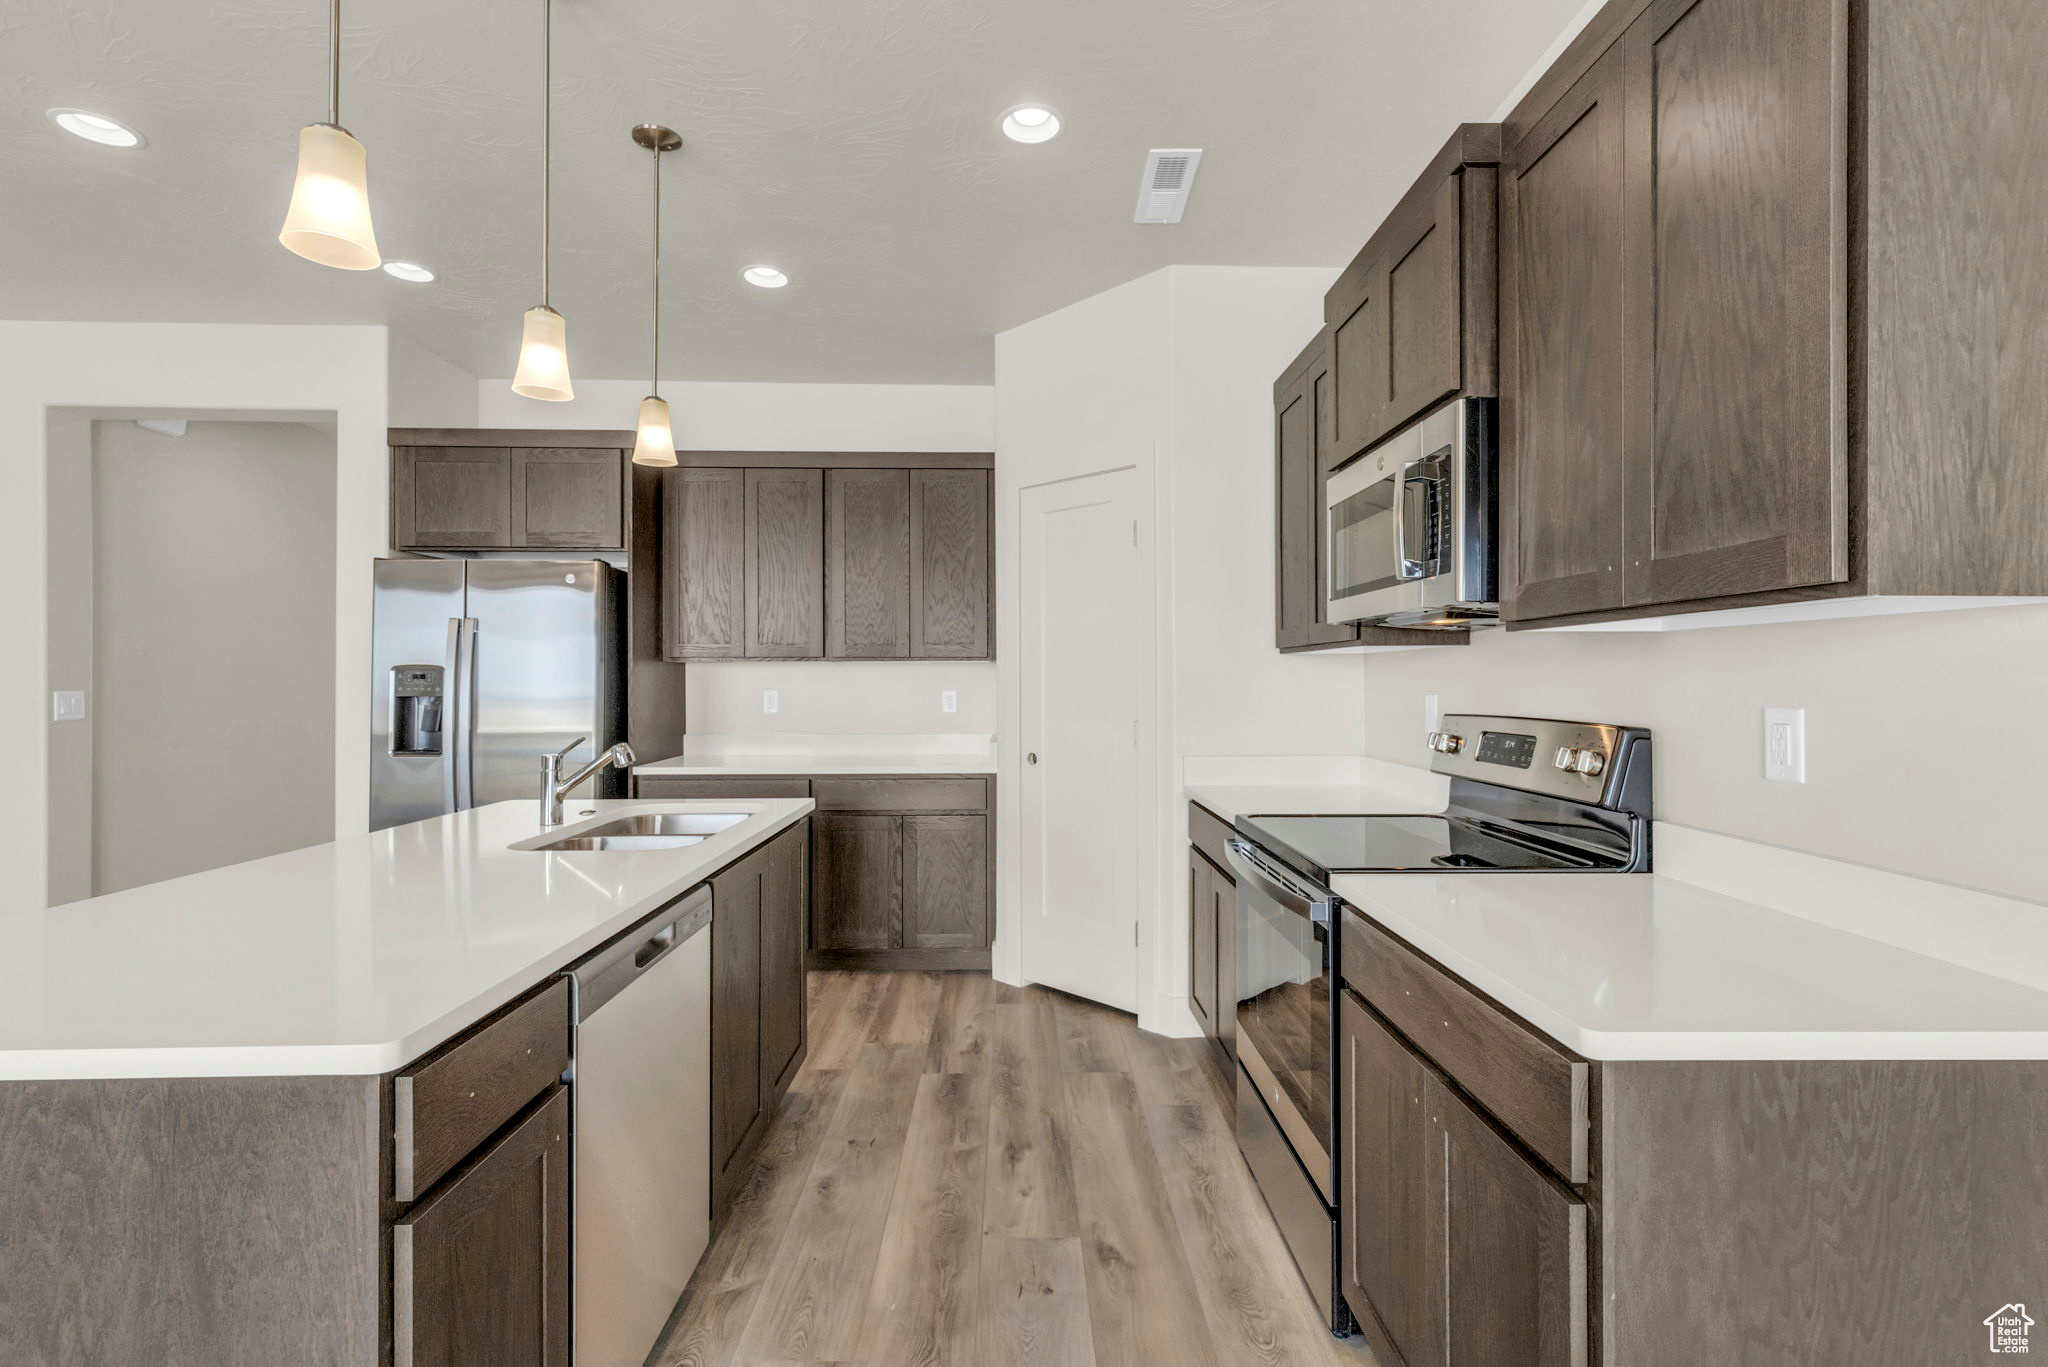 Kitchen featuring light wood-type flooring, dark brown cabinets, hanging light fixtures, appliances with stainless steel finishes, and a kitchen island with sink